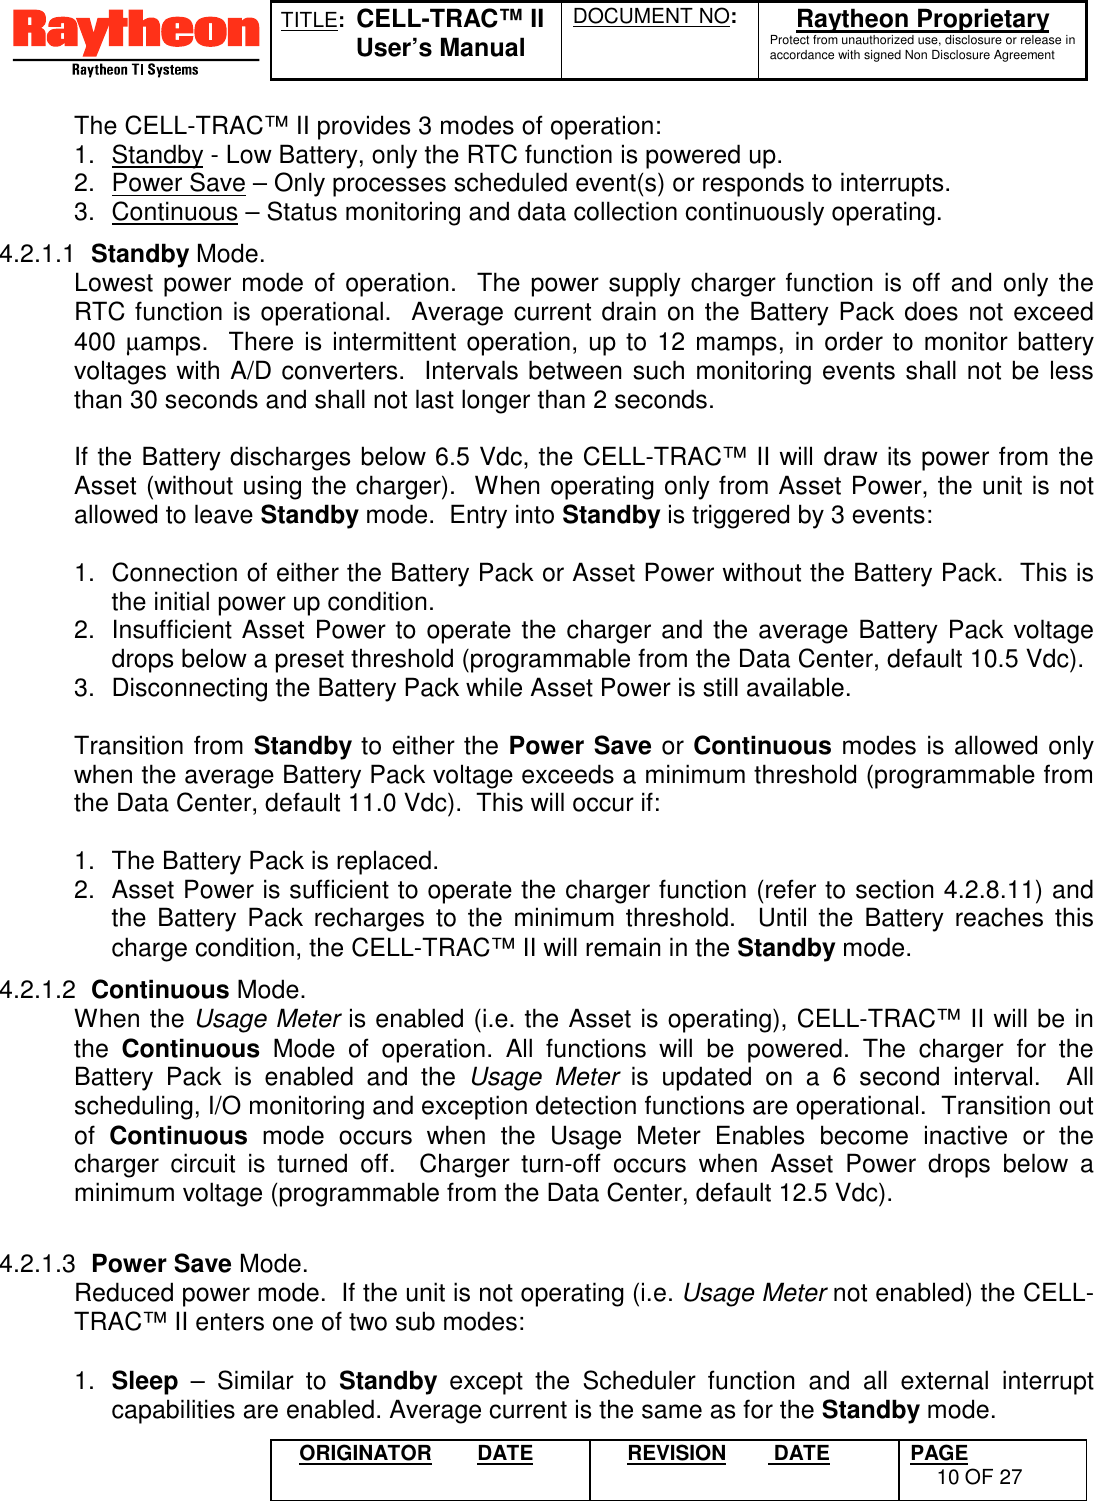 TITLE:  CELL-TRAC™ IIUser’s ManualDOCUMENT NO: Raytheon ProprietaryProtect from unauthorized use, disclosure or release inaccordance with signed Non Disclosure AgreementORIGINATOR DATE REVISION  DATE PAGE10 OF 27The CELL-TRAC™ II provides 3 modes of operation:1.  Standby - Low Battery, only the RTC function is powered up.2.  Power Save – Only processes scheduled event(s) or responds to interrupts.3.  Continuous – Status monitoring and data collection continuously operating.4.2.1.1  Standby Mode.Lowest power mode of operation.  The power supply charger function is off and only theRTC function is operational.  Average current drain on the Battery Pack does not exceed400 µamps.  There is intermittent operation, up to 12 mamps, in order to monitor batteryvoltages with A/D converters.  Intervals between such monitoring events shall not be lessthan 30 seconds and shall not last longer than 2 seconds.If the Battery discharges below 6.5 Vdc, the CELL-TRAC™ II will draw its power from theAsset (without using the charger).  When operating only from Asset Power, the unit is notallowed to leave Standby mode.  Entry into Standby is triggered by 3 events:1.  Connection of either the Battery Pack or Asset Power without the Battery Pack.  This isthe initial power up condition.2.  Insufficient Asset Power to operate the charger and the average Battery Pack voltagedrops below a preset threshold (programmable from the Data Center, default 10.5 Vdc).3.  Disconnecting the Battery Pack while Asset Power is still available.Transition from Standby to either the Power Save or Continuous modes is allowed onlywhen the average Battery Pack voltage exceeds a minimum threshold (programmable fromthe Data Center, default 11.0 Vdc).  This will occur if:1.  The Battery Pack is replaced.2.  Asset Power is sufficient to operate the charger function (refer to section 4.2.8.11) andthe Battery Pack recharges to the minimum threshold.  Until the Battery reaches thischarge condition, the CELL-TRAC™ II will remain in the Standby mode.4.2.1.2  Continuous Mode.When the Usage Meter is enabled (i.e. the Asset is operating), CELL-TRAC™ II will be inthe  Continuous Mode of operation. All functions will be powered. The charger for theBattery Pack is enabled and the Usage Meter is updated on a 6 second interval.  Allscheduling, I/O monitoring and exception detection functions are operational.  Transition outof  Continuous mode occurs when the Usage Meter Enables become inactive or thecharger circuit is turned off.  Charger turn-off occurs when Asset Power drops below aminimum voltage (programmable from the Data Center, default 12.5 Vdc).4.2.1.3  Power Save Mode.Reduced power mode.  If the unit is not operating (i.e. Usage Meter not enabled) the CELL-TRAC™ II enters one of two sub modes:1.  Sleep – Similar to Standby except the Scheduler function and all external interruptcapabilities are enabled. Average current is the same as for the Standby mode.